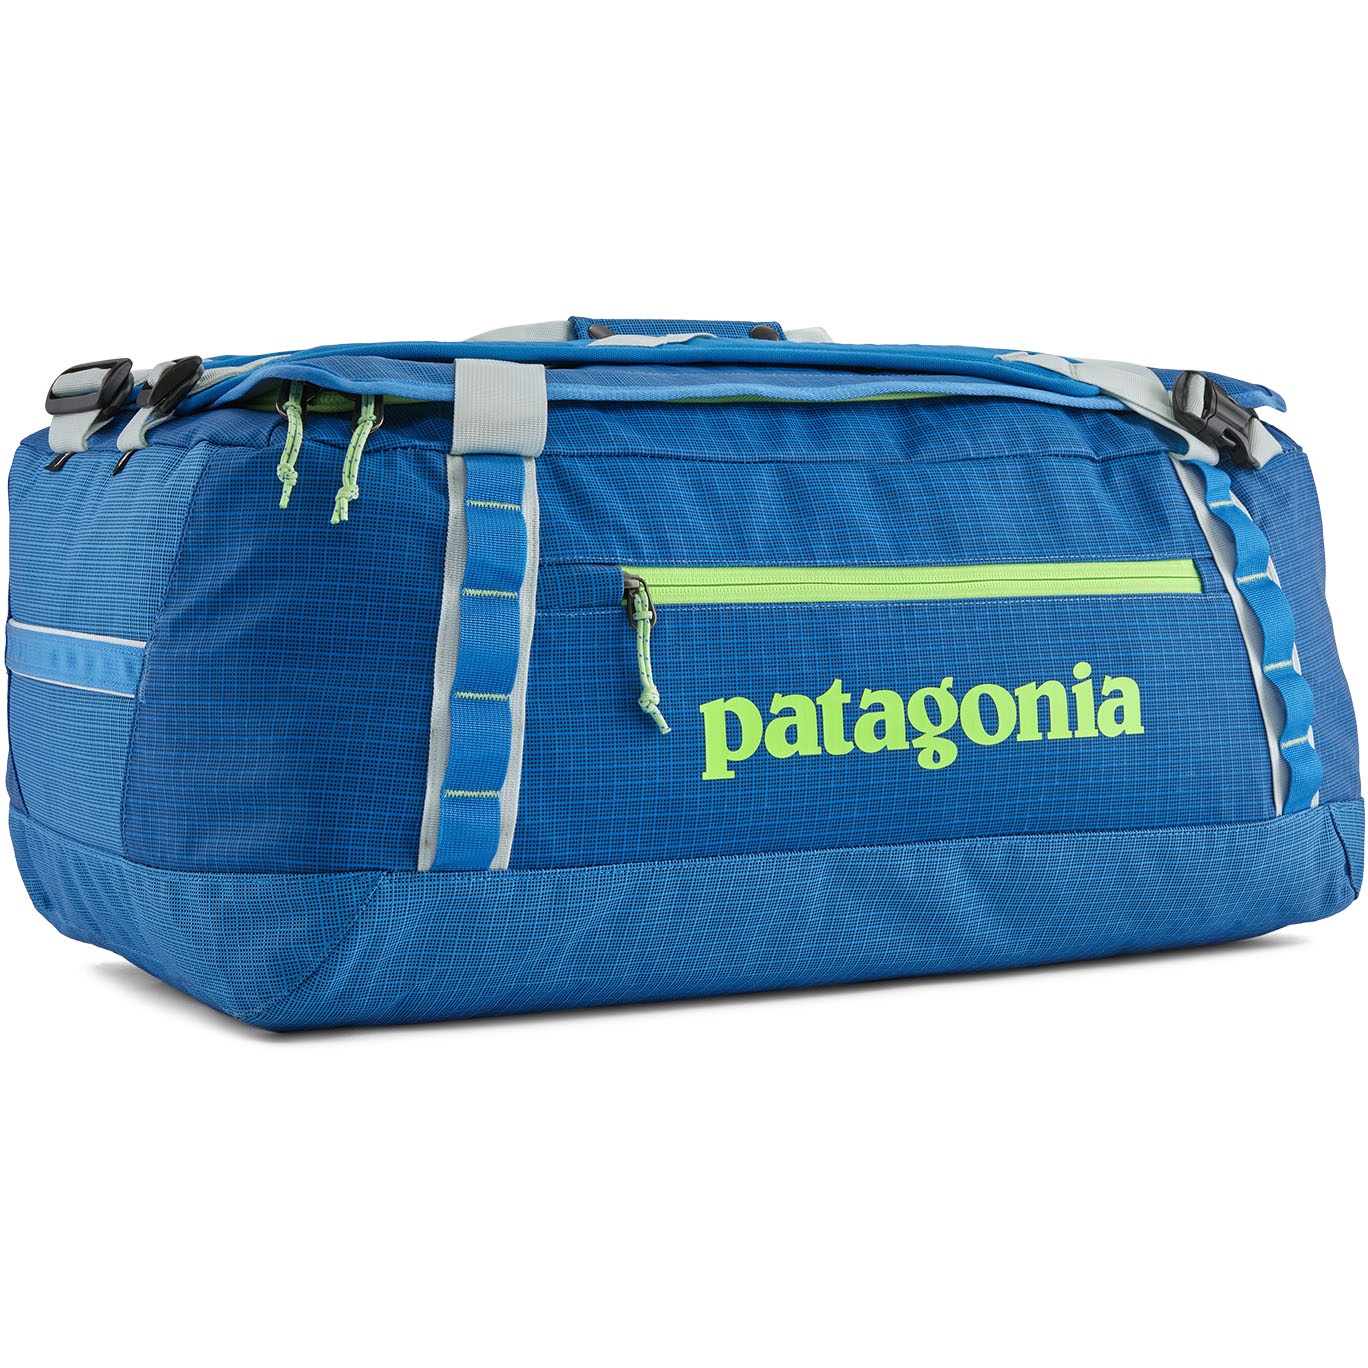 Picture of Patagonia Black Hole Duffel 55L - Vessel Blue